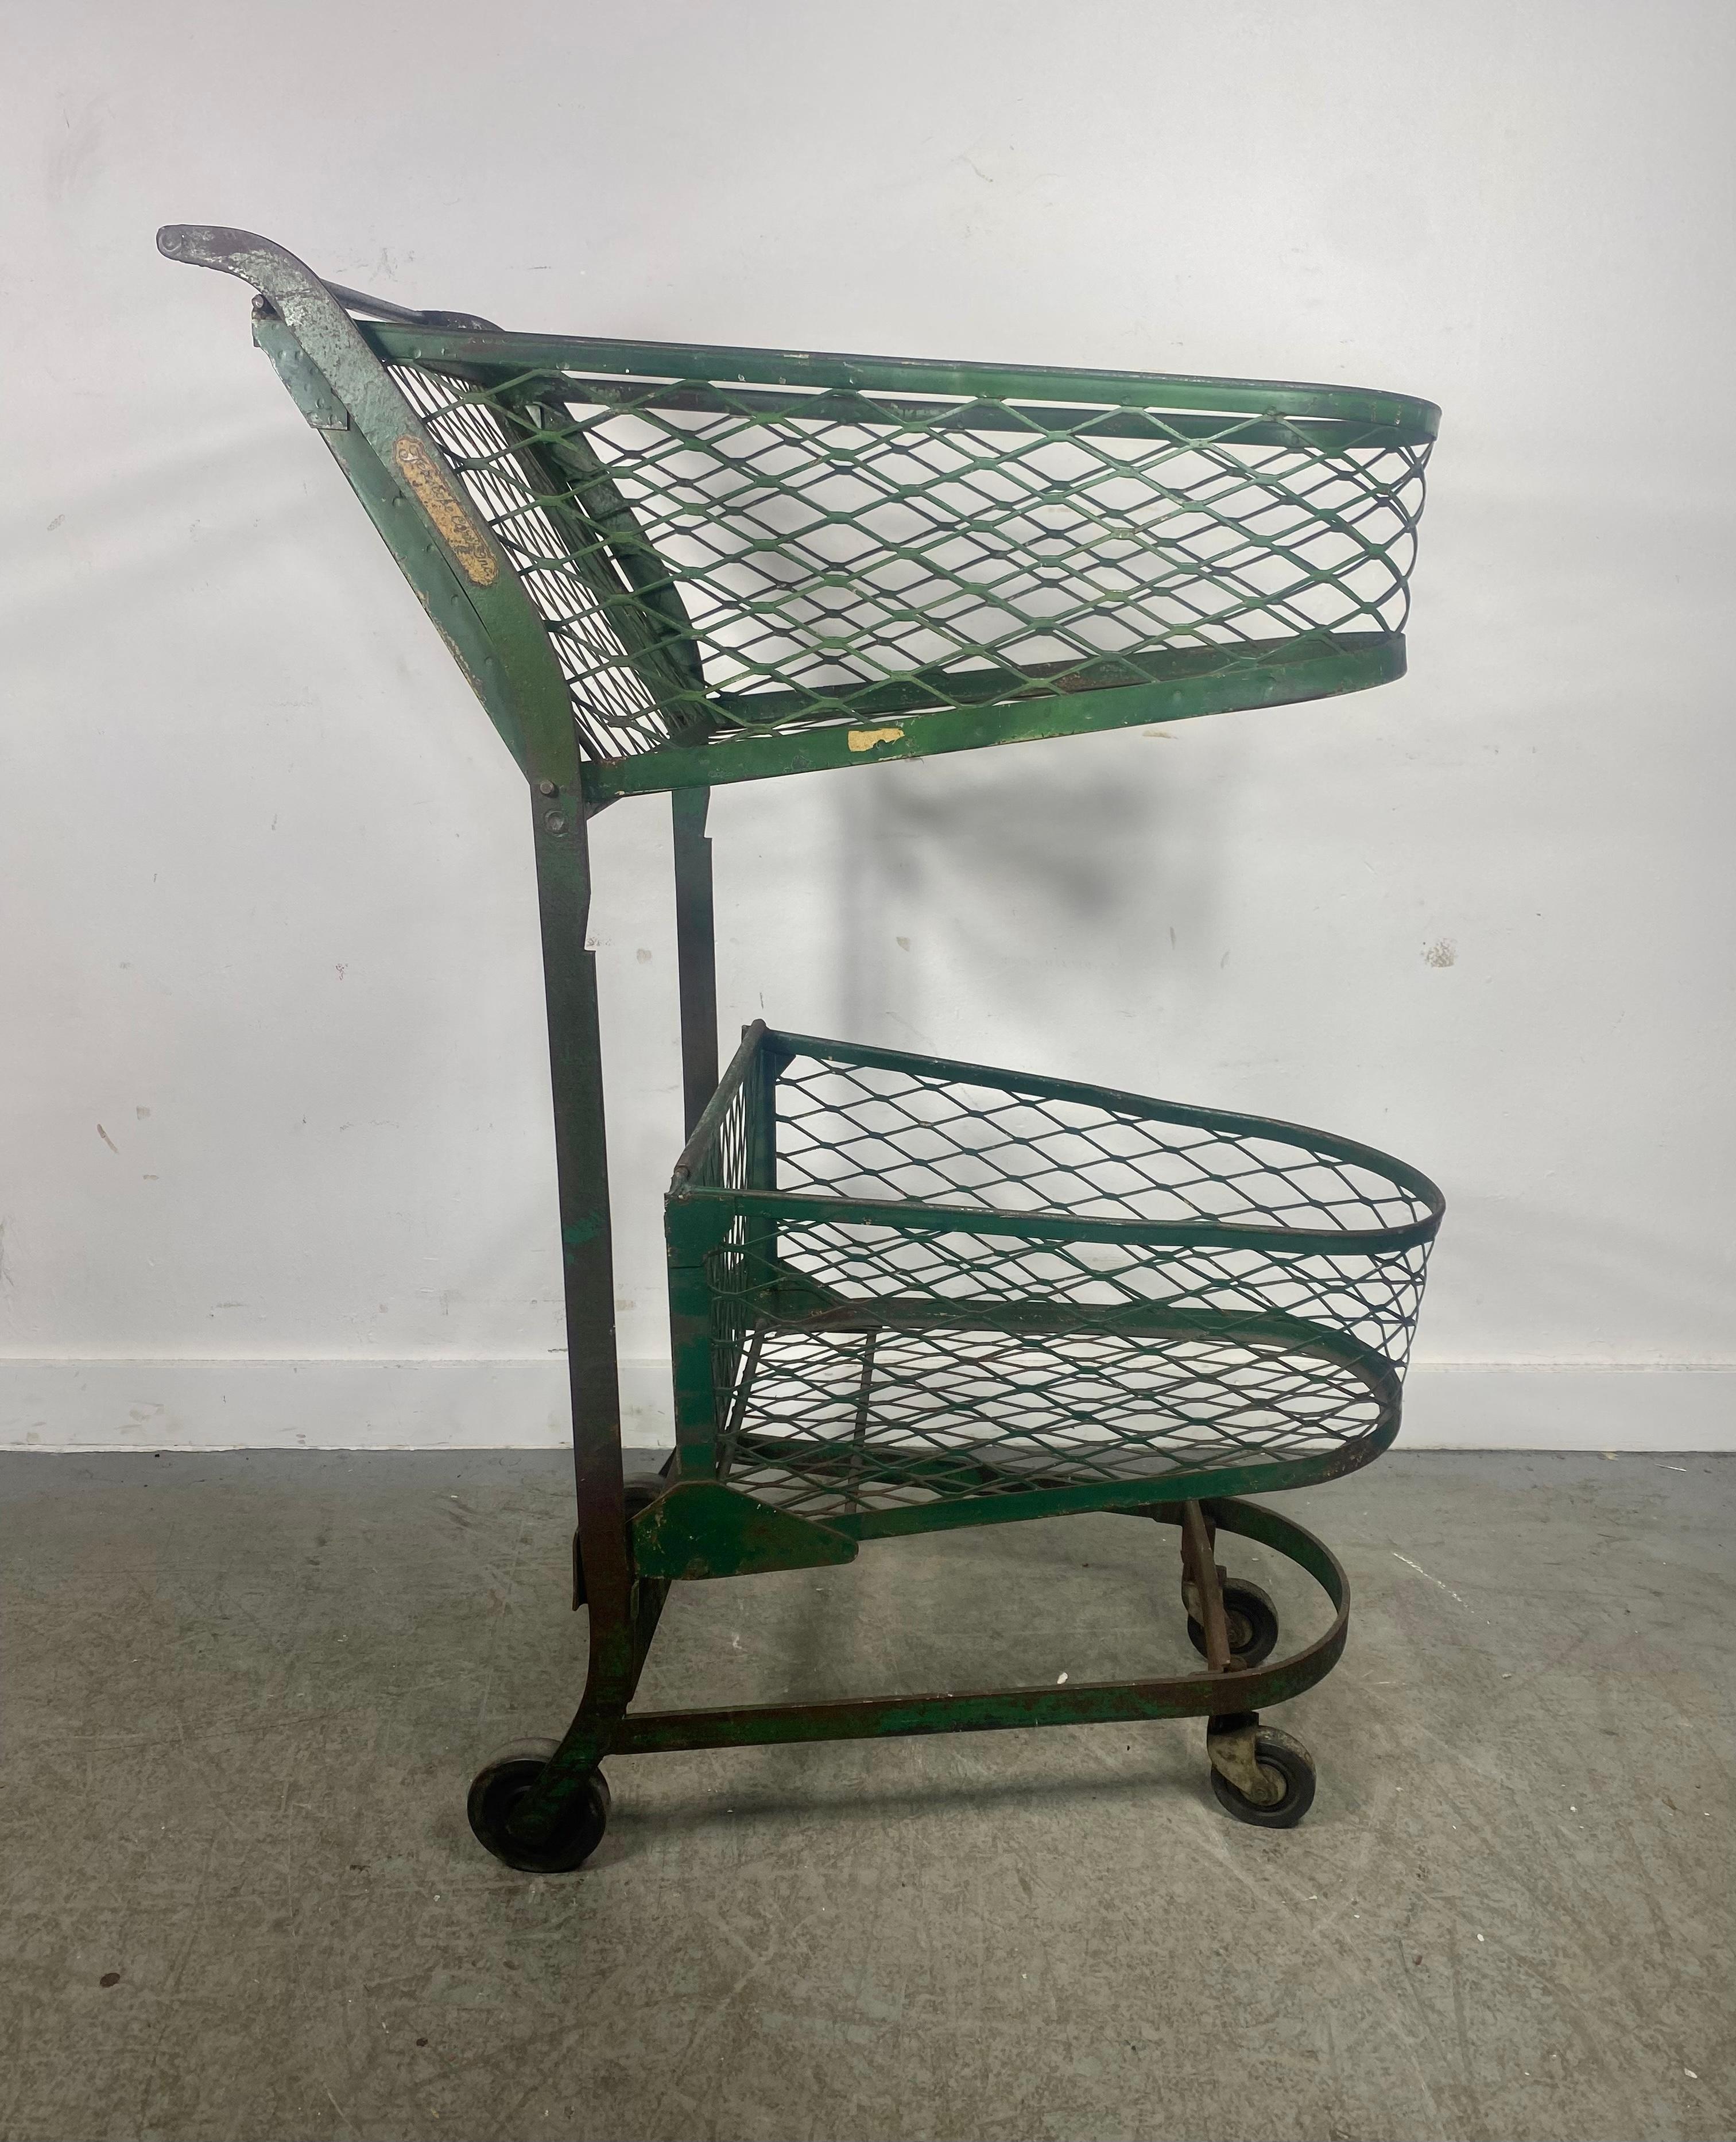 Painted Unusual Industrial Shopping Cart by Orla Watson , Telescope Cart Inc. For Sale